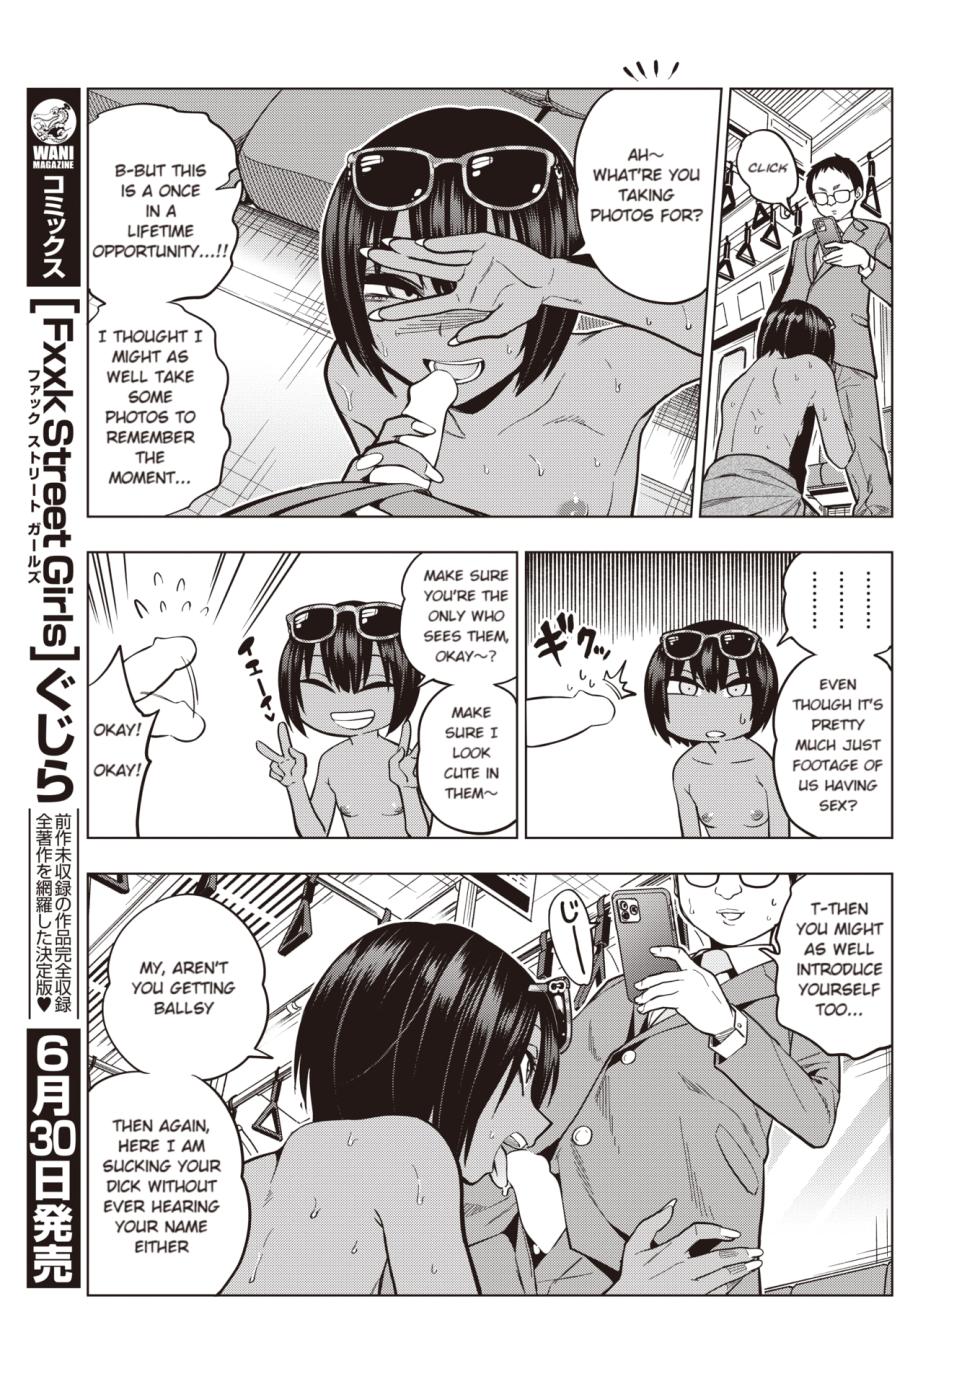 [Gujira] "Might As Well" Bitch-chan [English] [rollcake scans] - Page 13